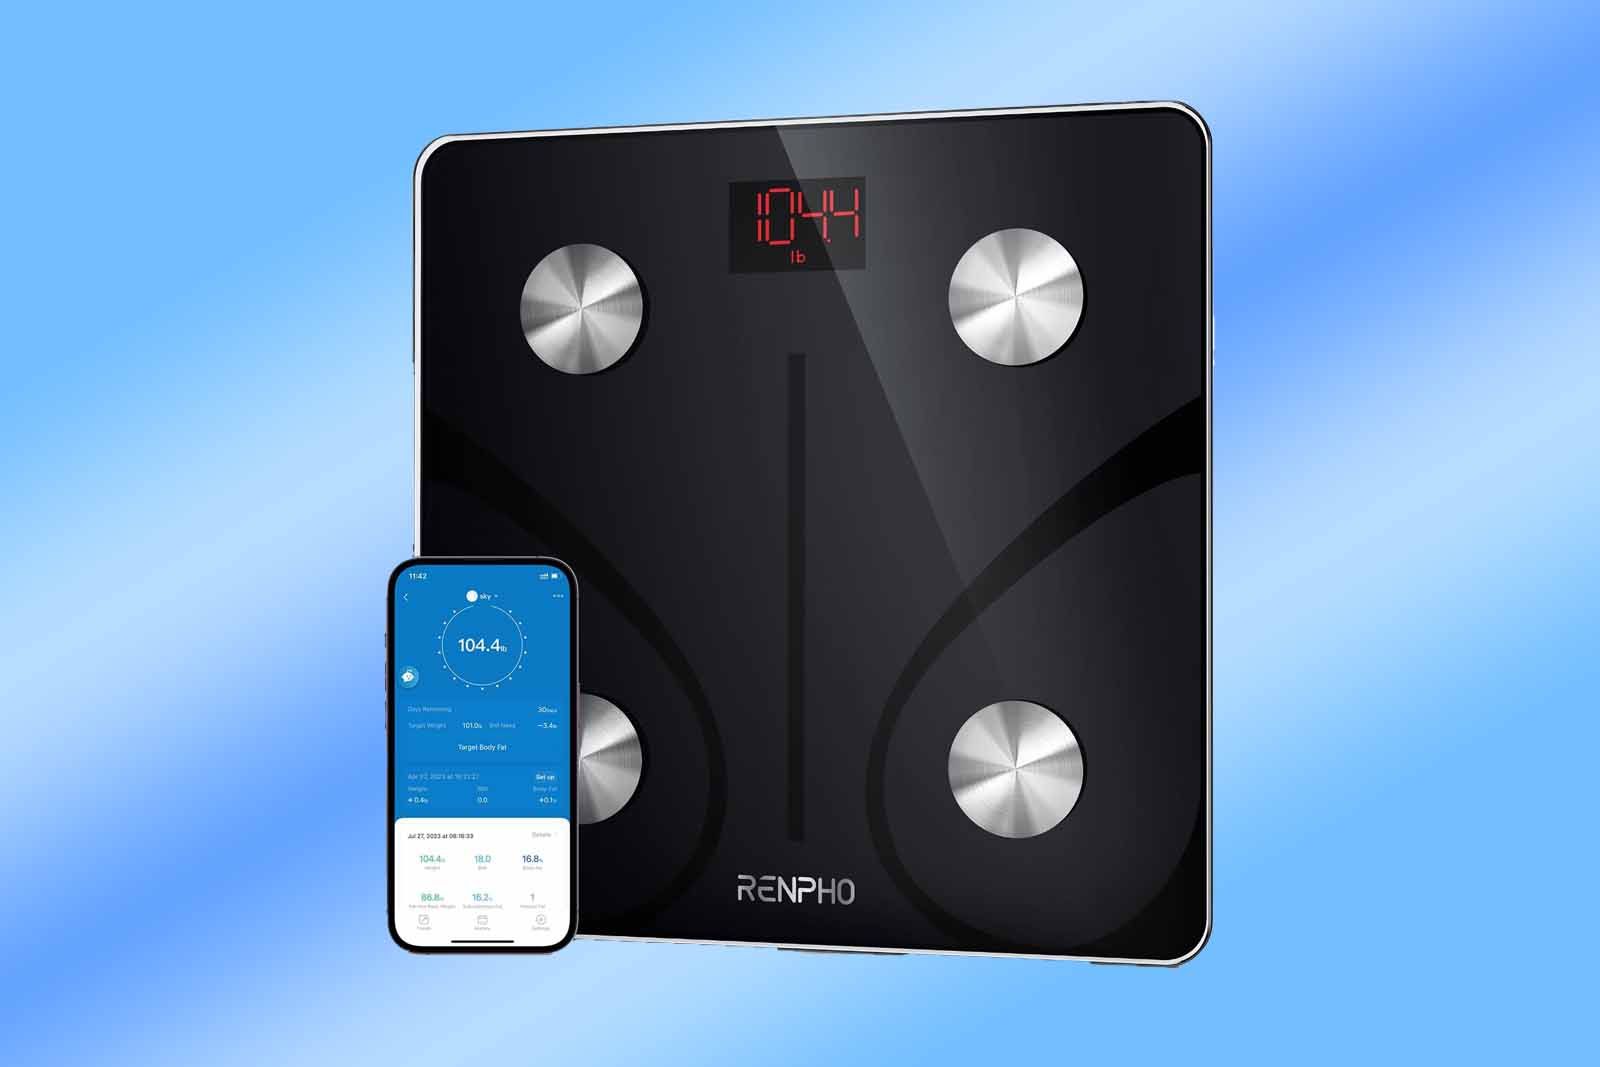 Renpho smart scale on a blue gradient background